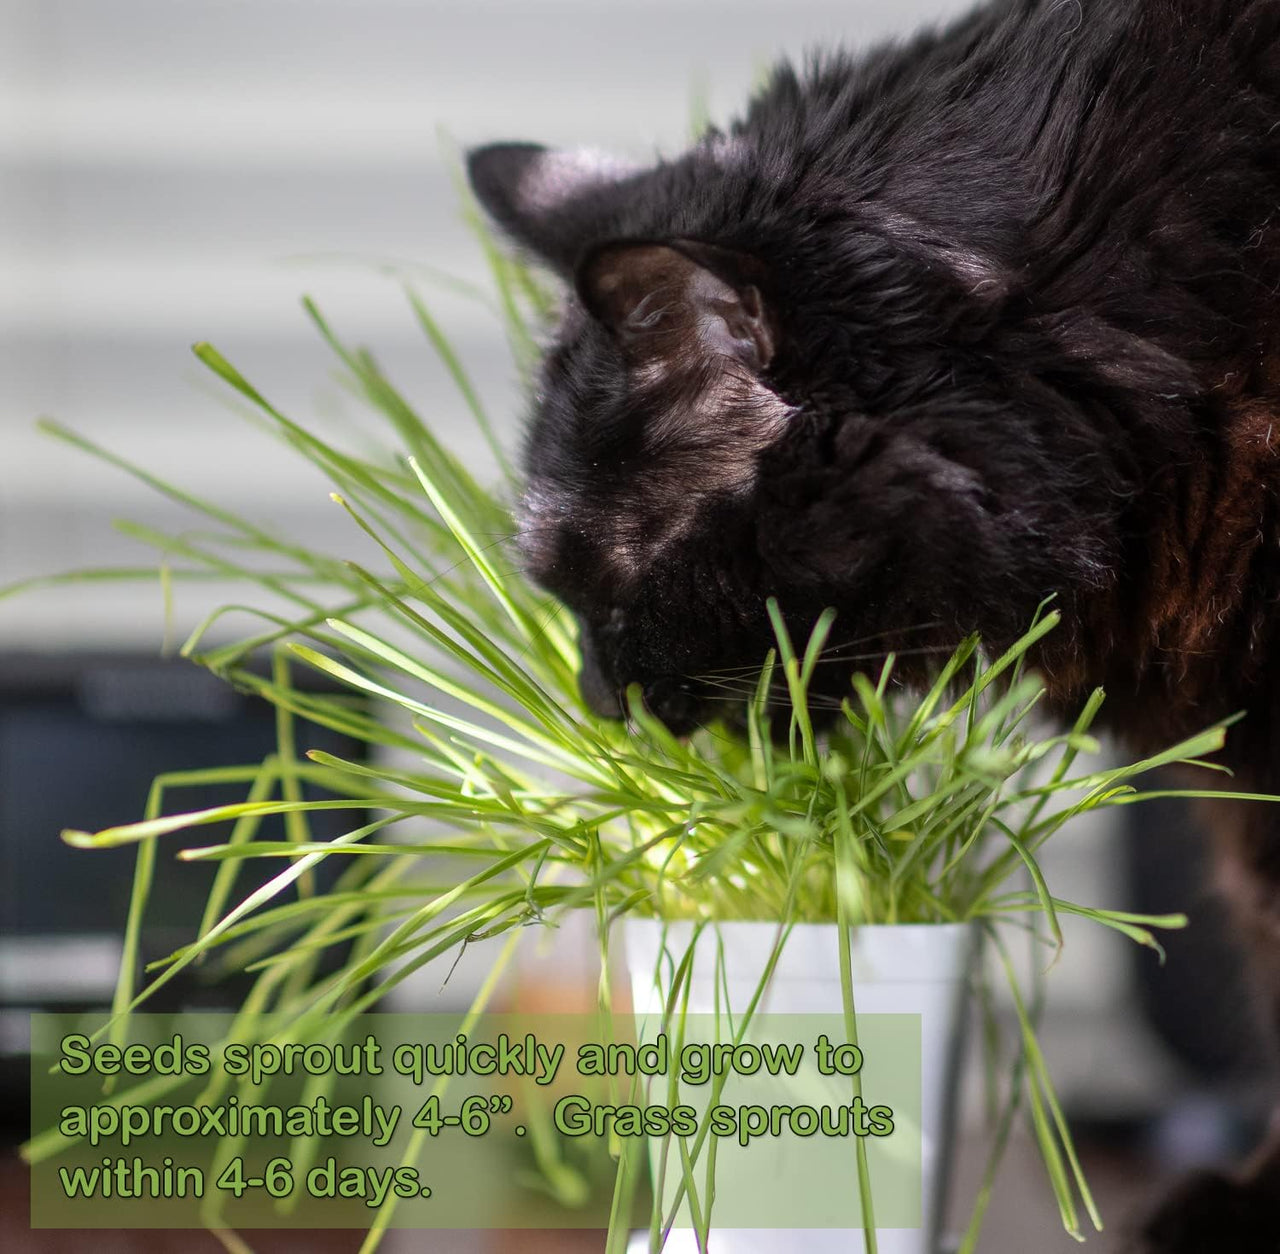 DesertUSA Cat Grass Seeds, Organic Non-GMO Wheatgrass, for Pet or Human Consumption Including Sprouts, Juicing, Smoothies, Instructions for Pets and Humans (24)